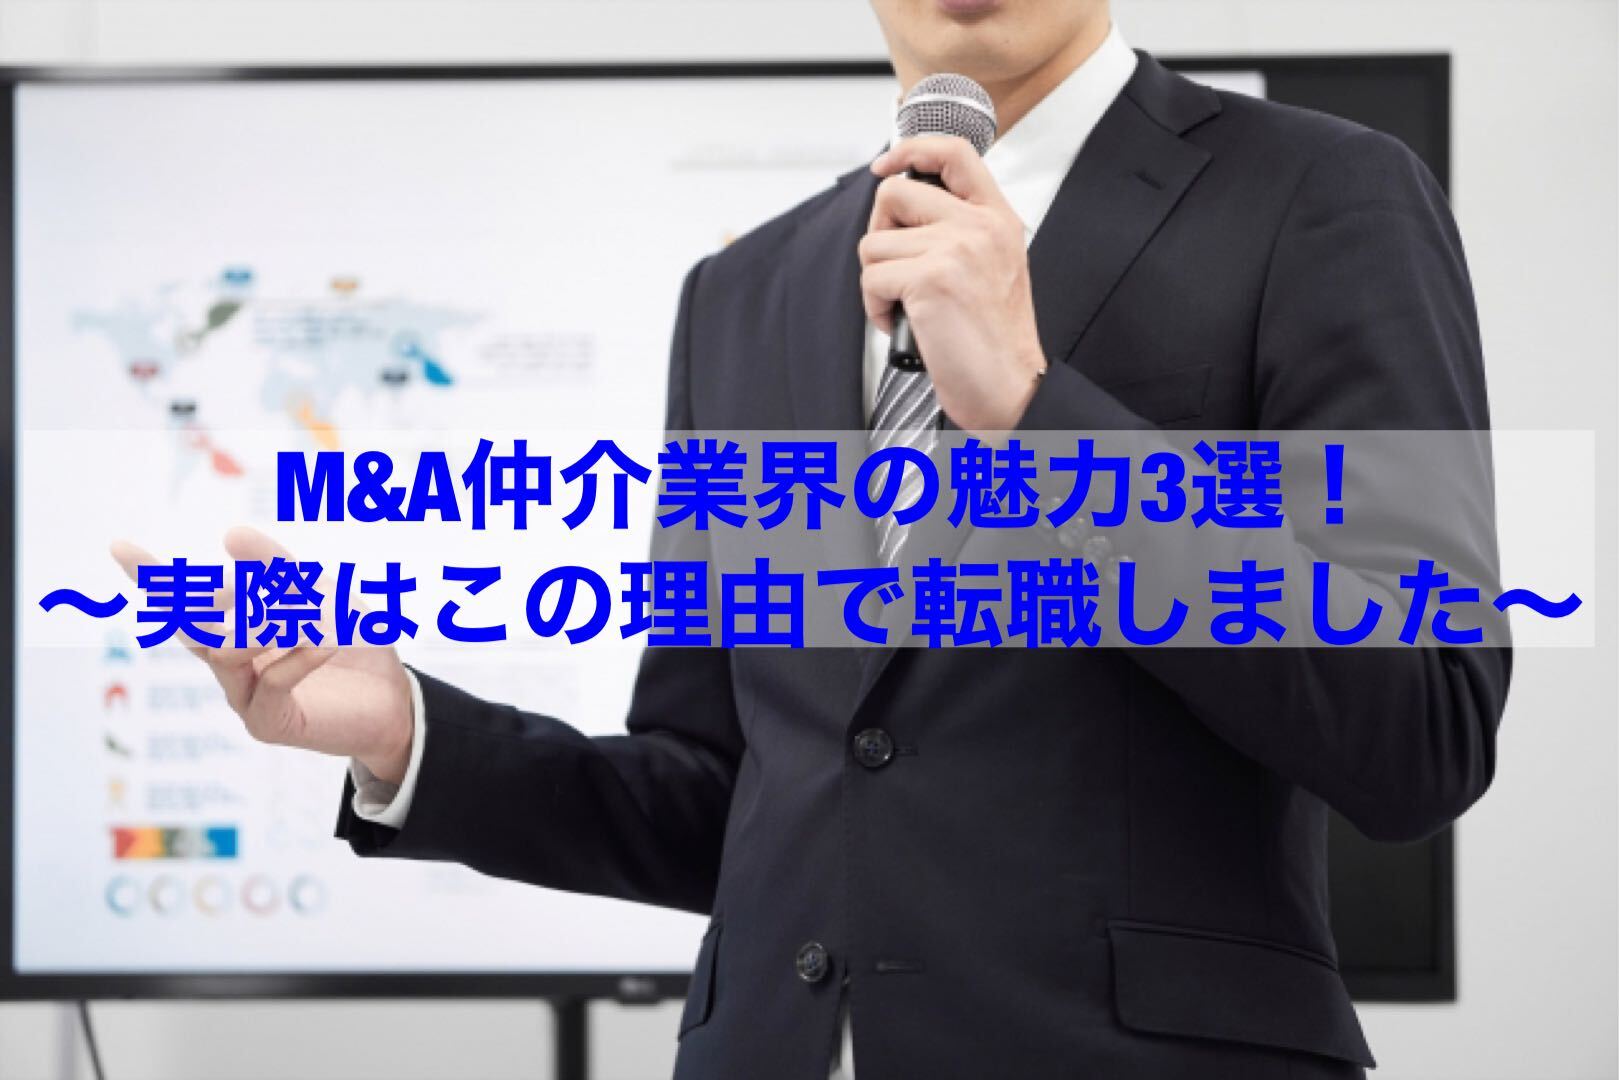 You are currently viewing 【転職情報】Ｍ＆Ａ仲介業界の魅力３選！～実際はこの理由で転職しました～